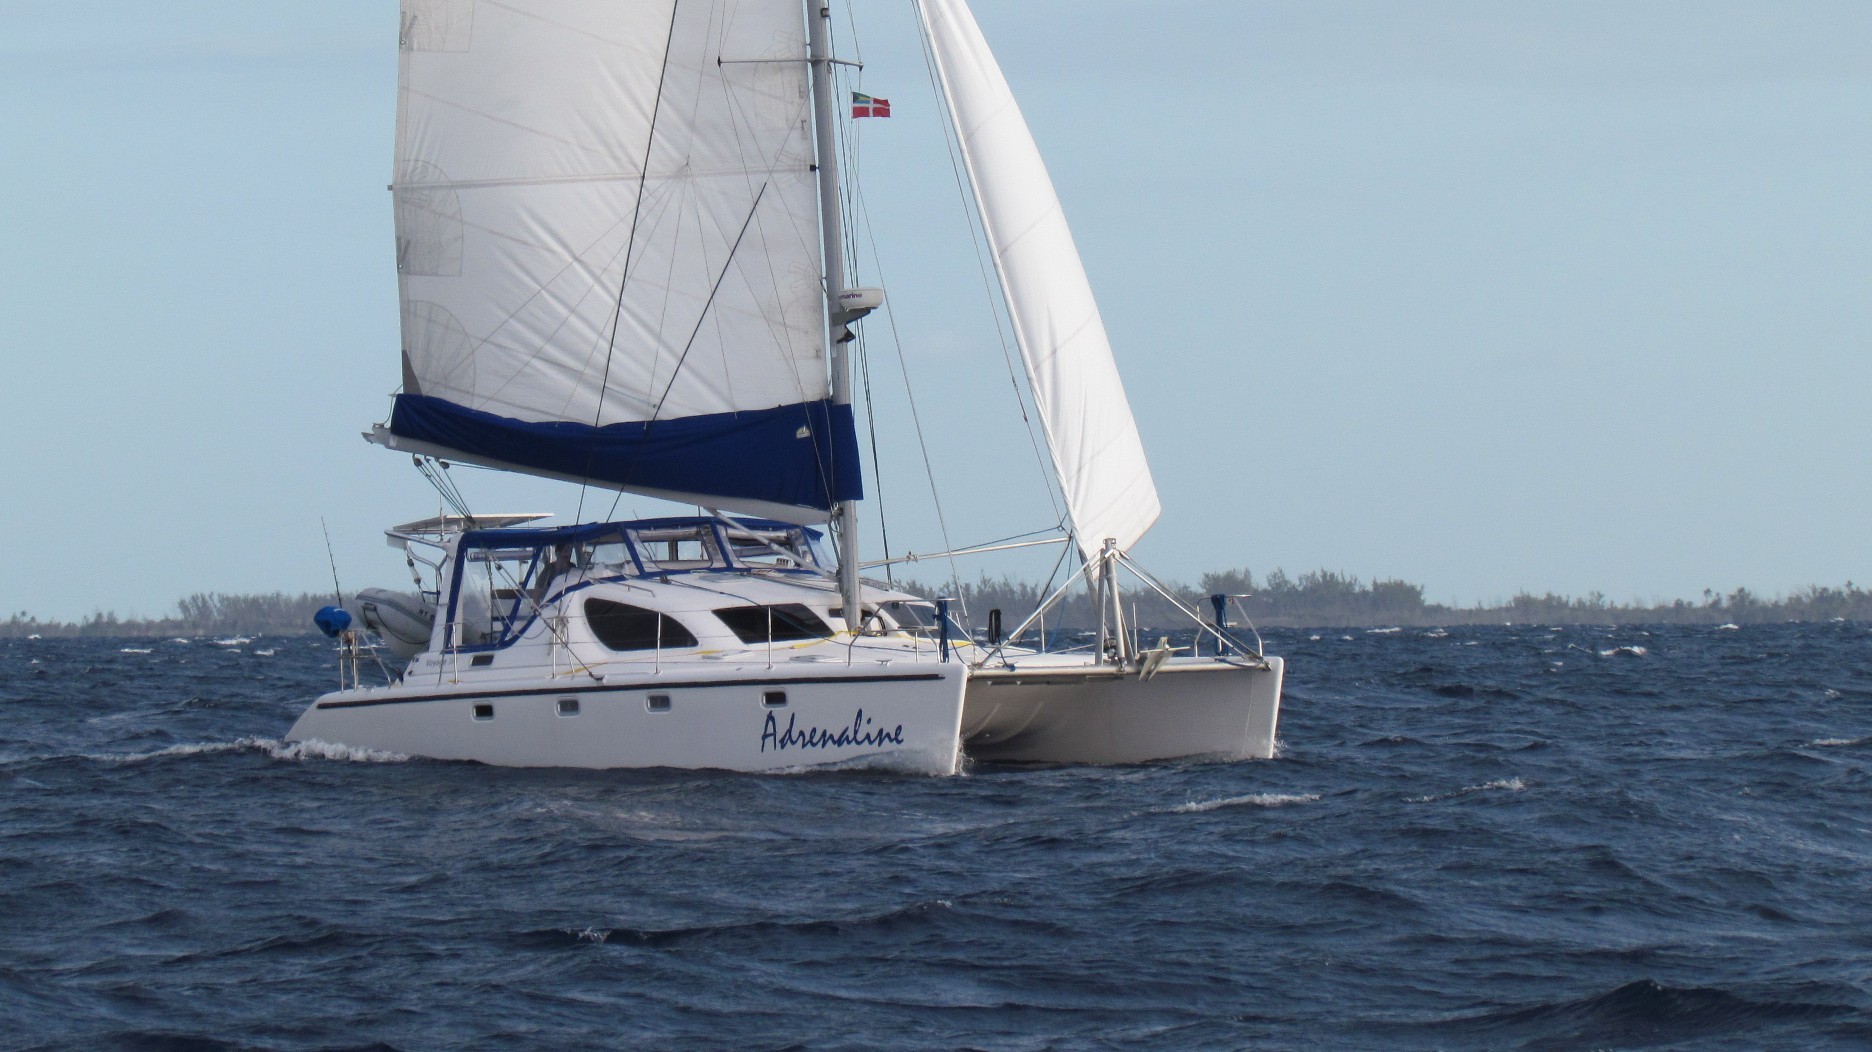 Used Sail Catamarans for Sale 2001 Voyage 38 